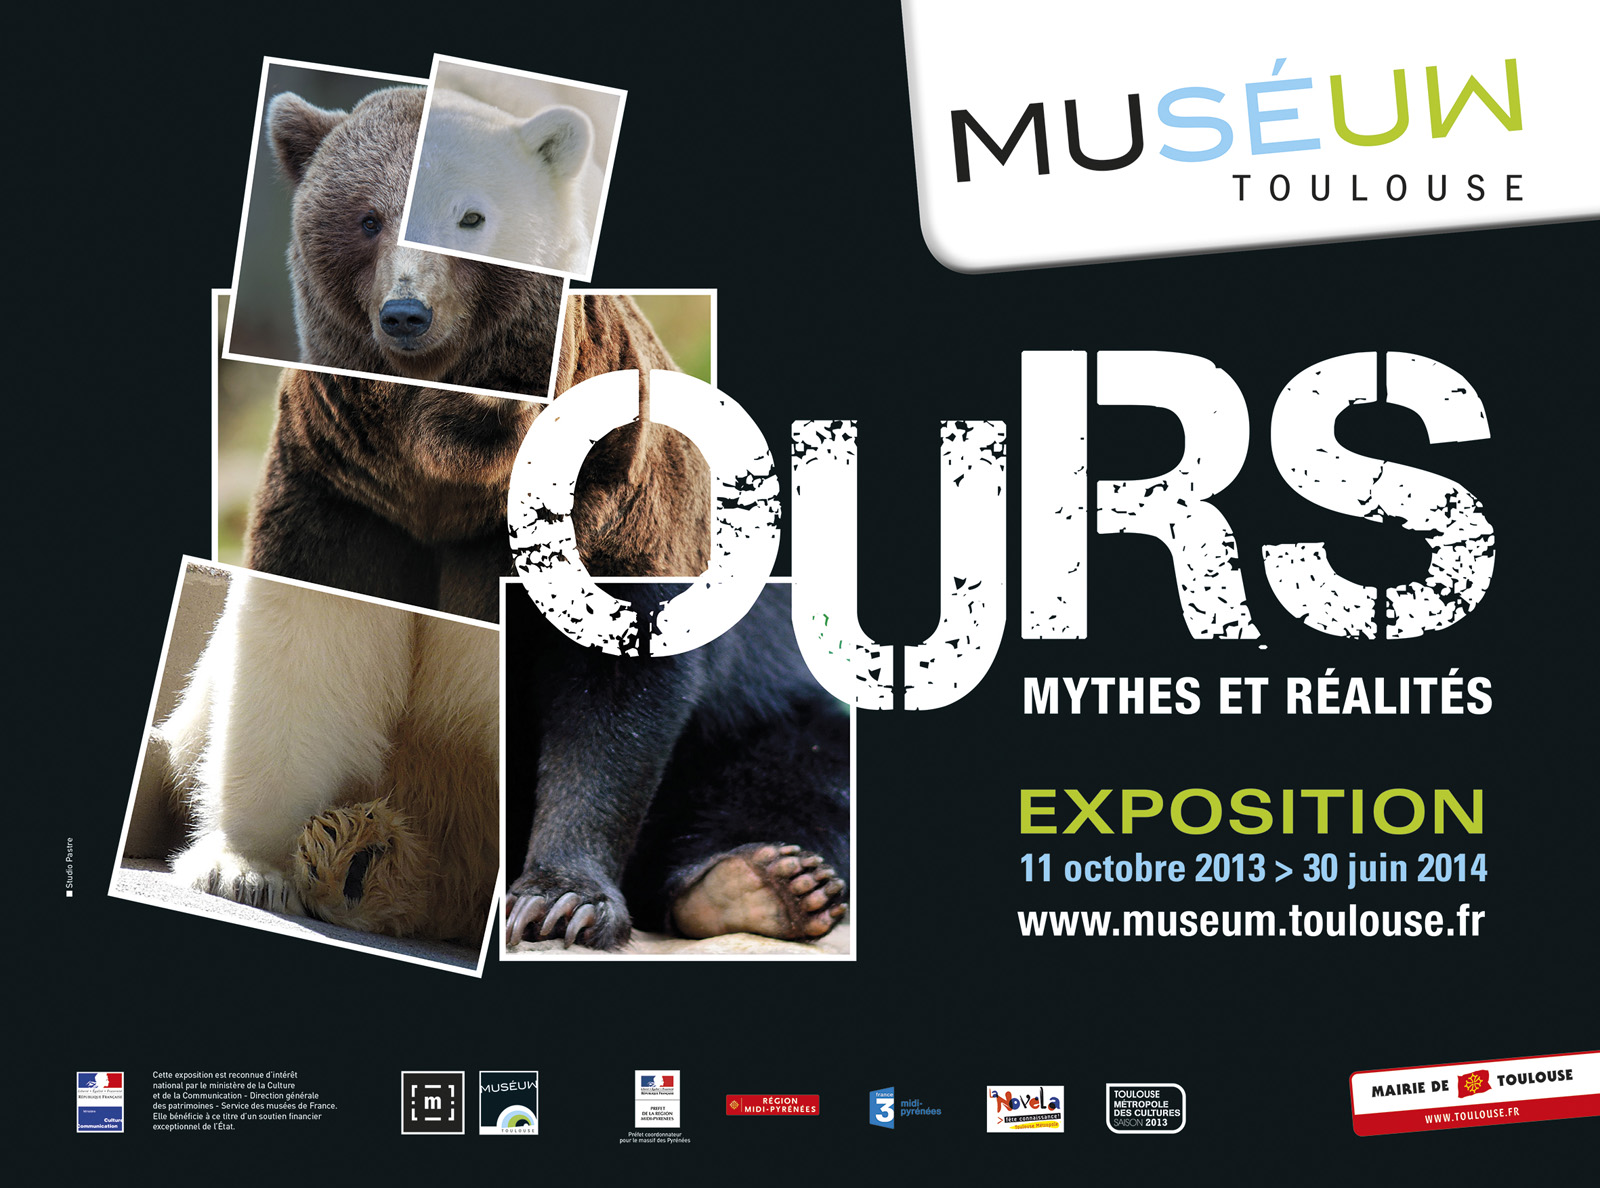 http://www.museum.toulouse.fr/